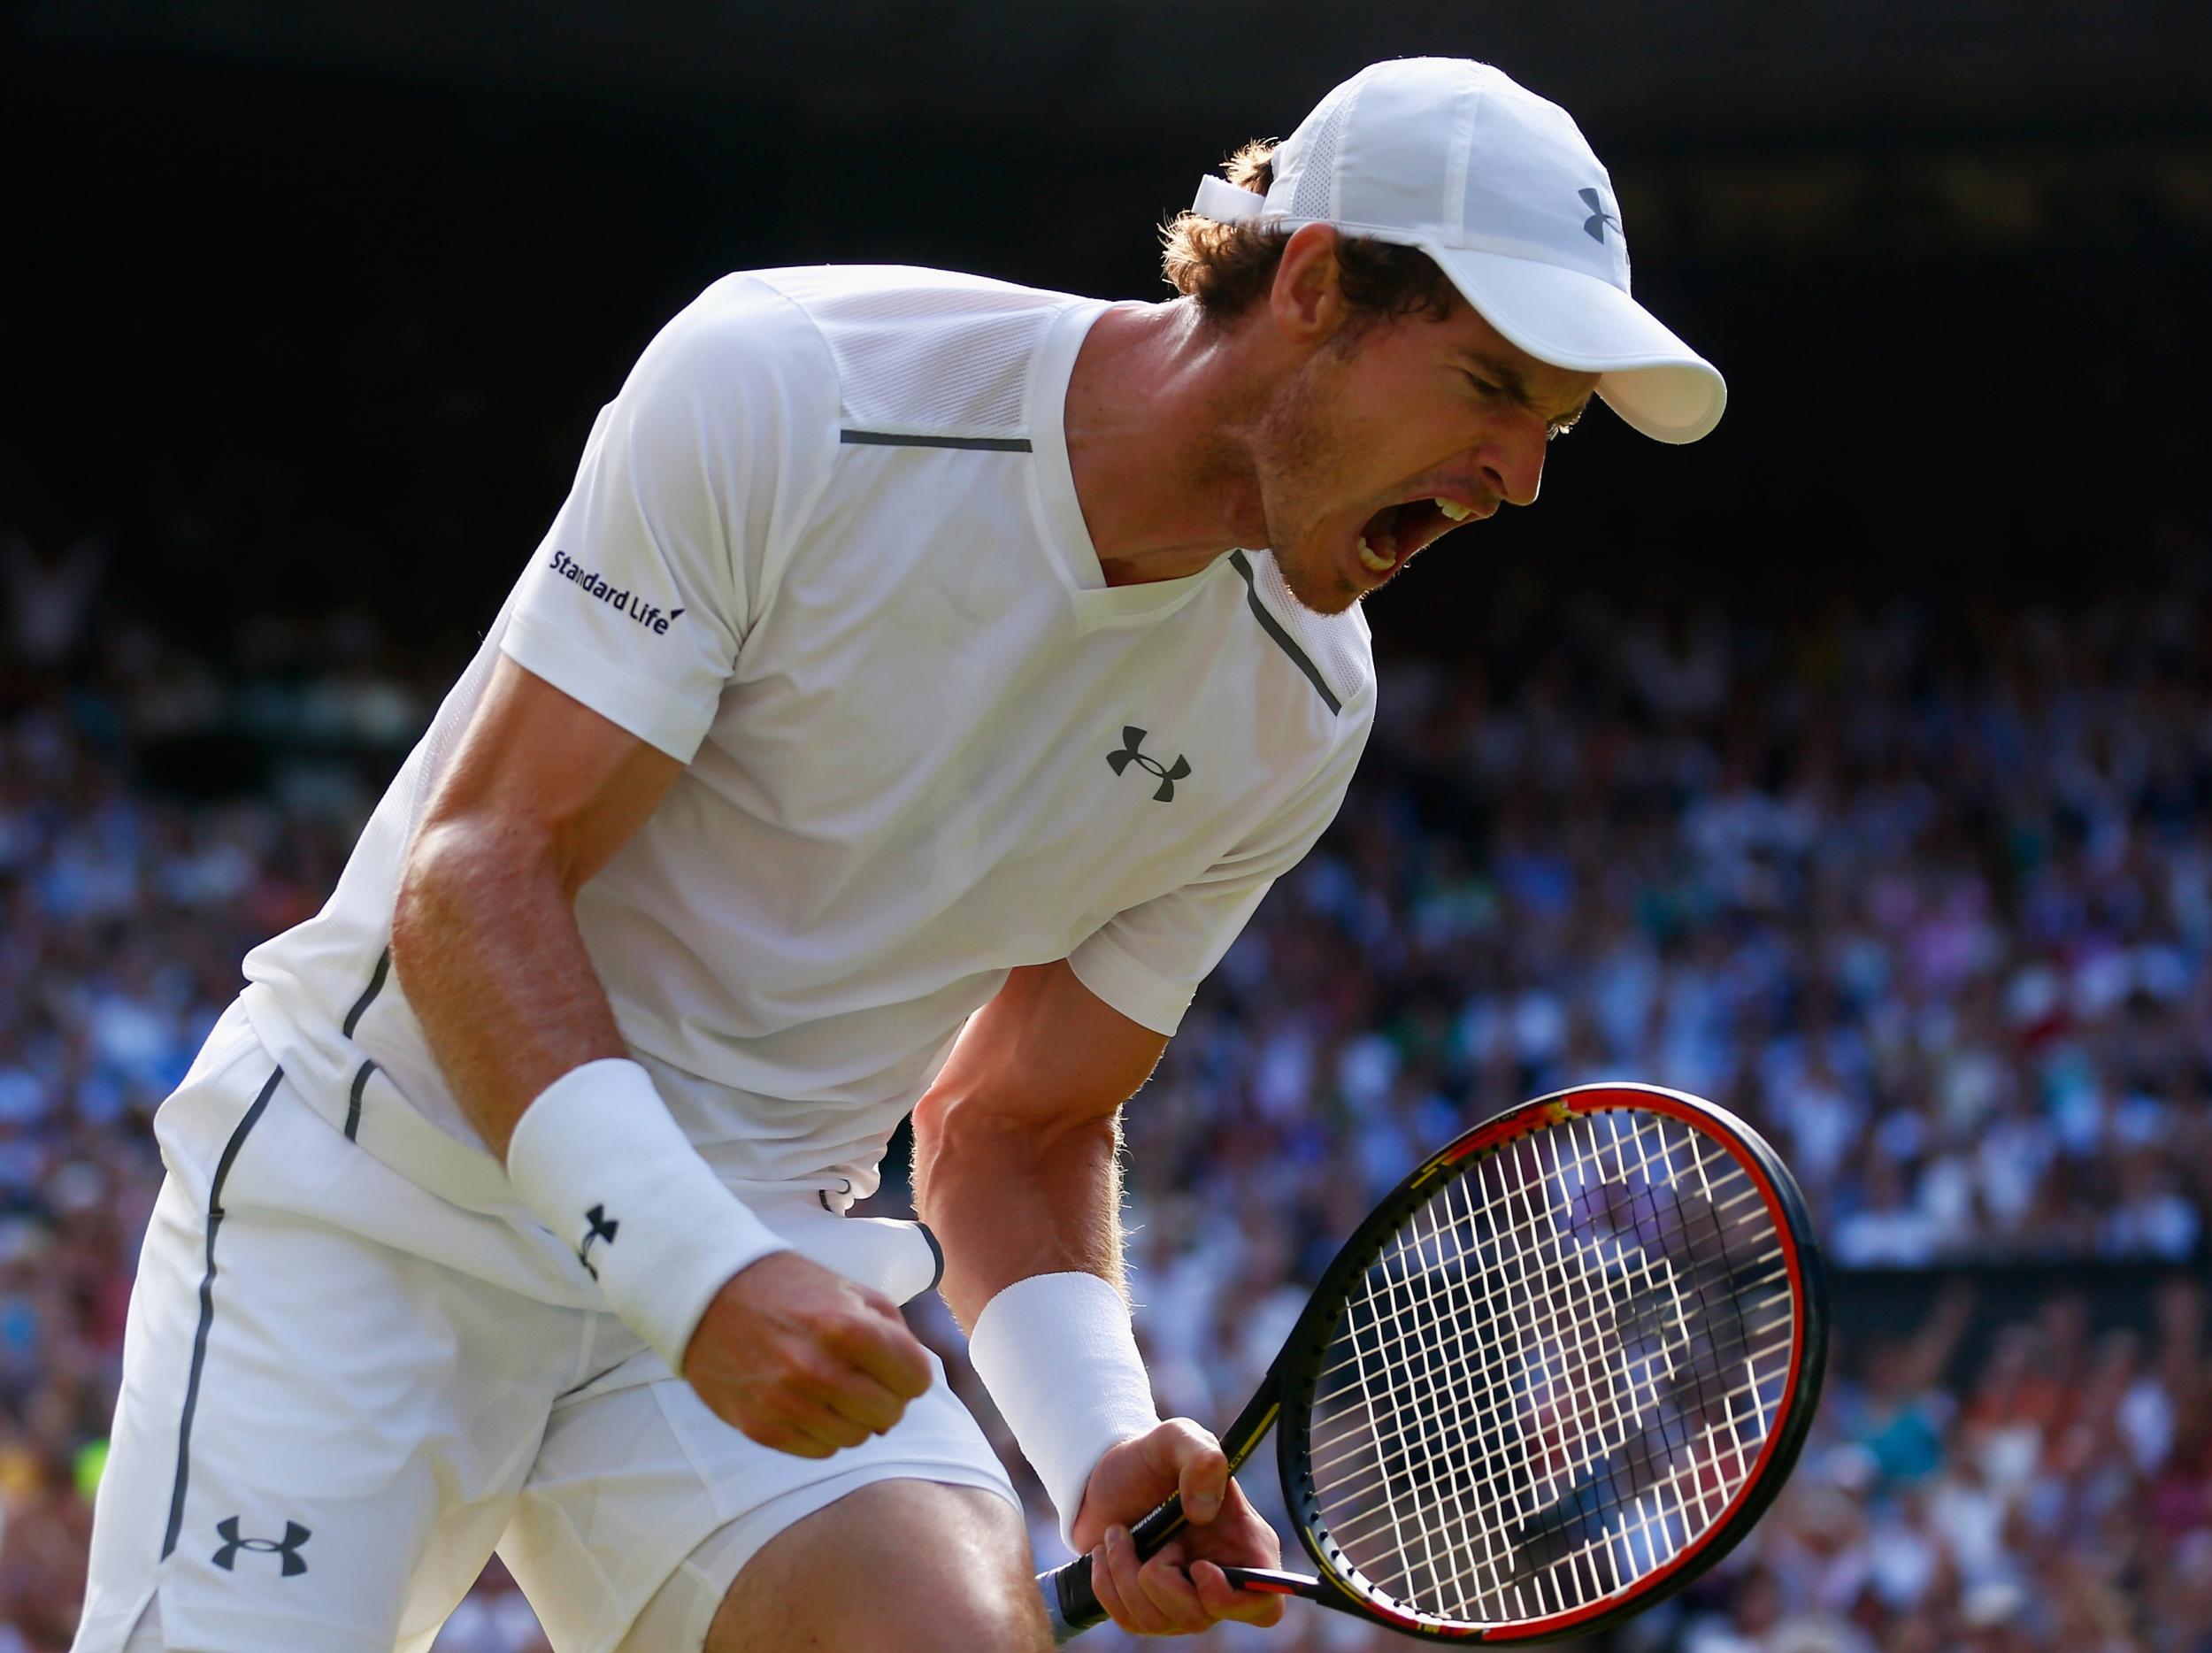 &#13;
Murray is renowned for being one of the toughest players on tour &#13;